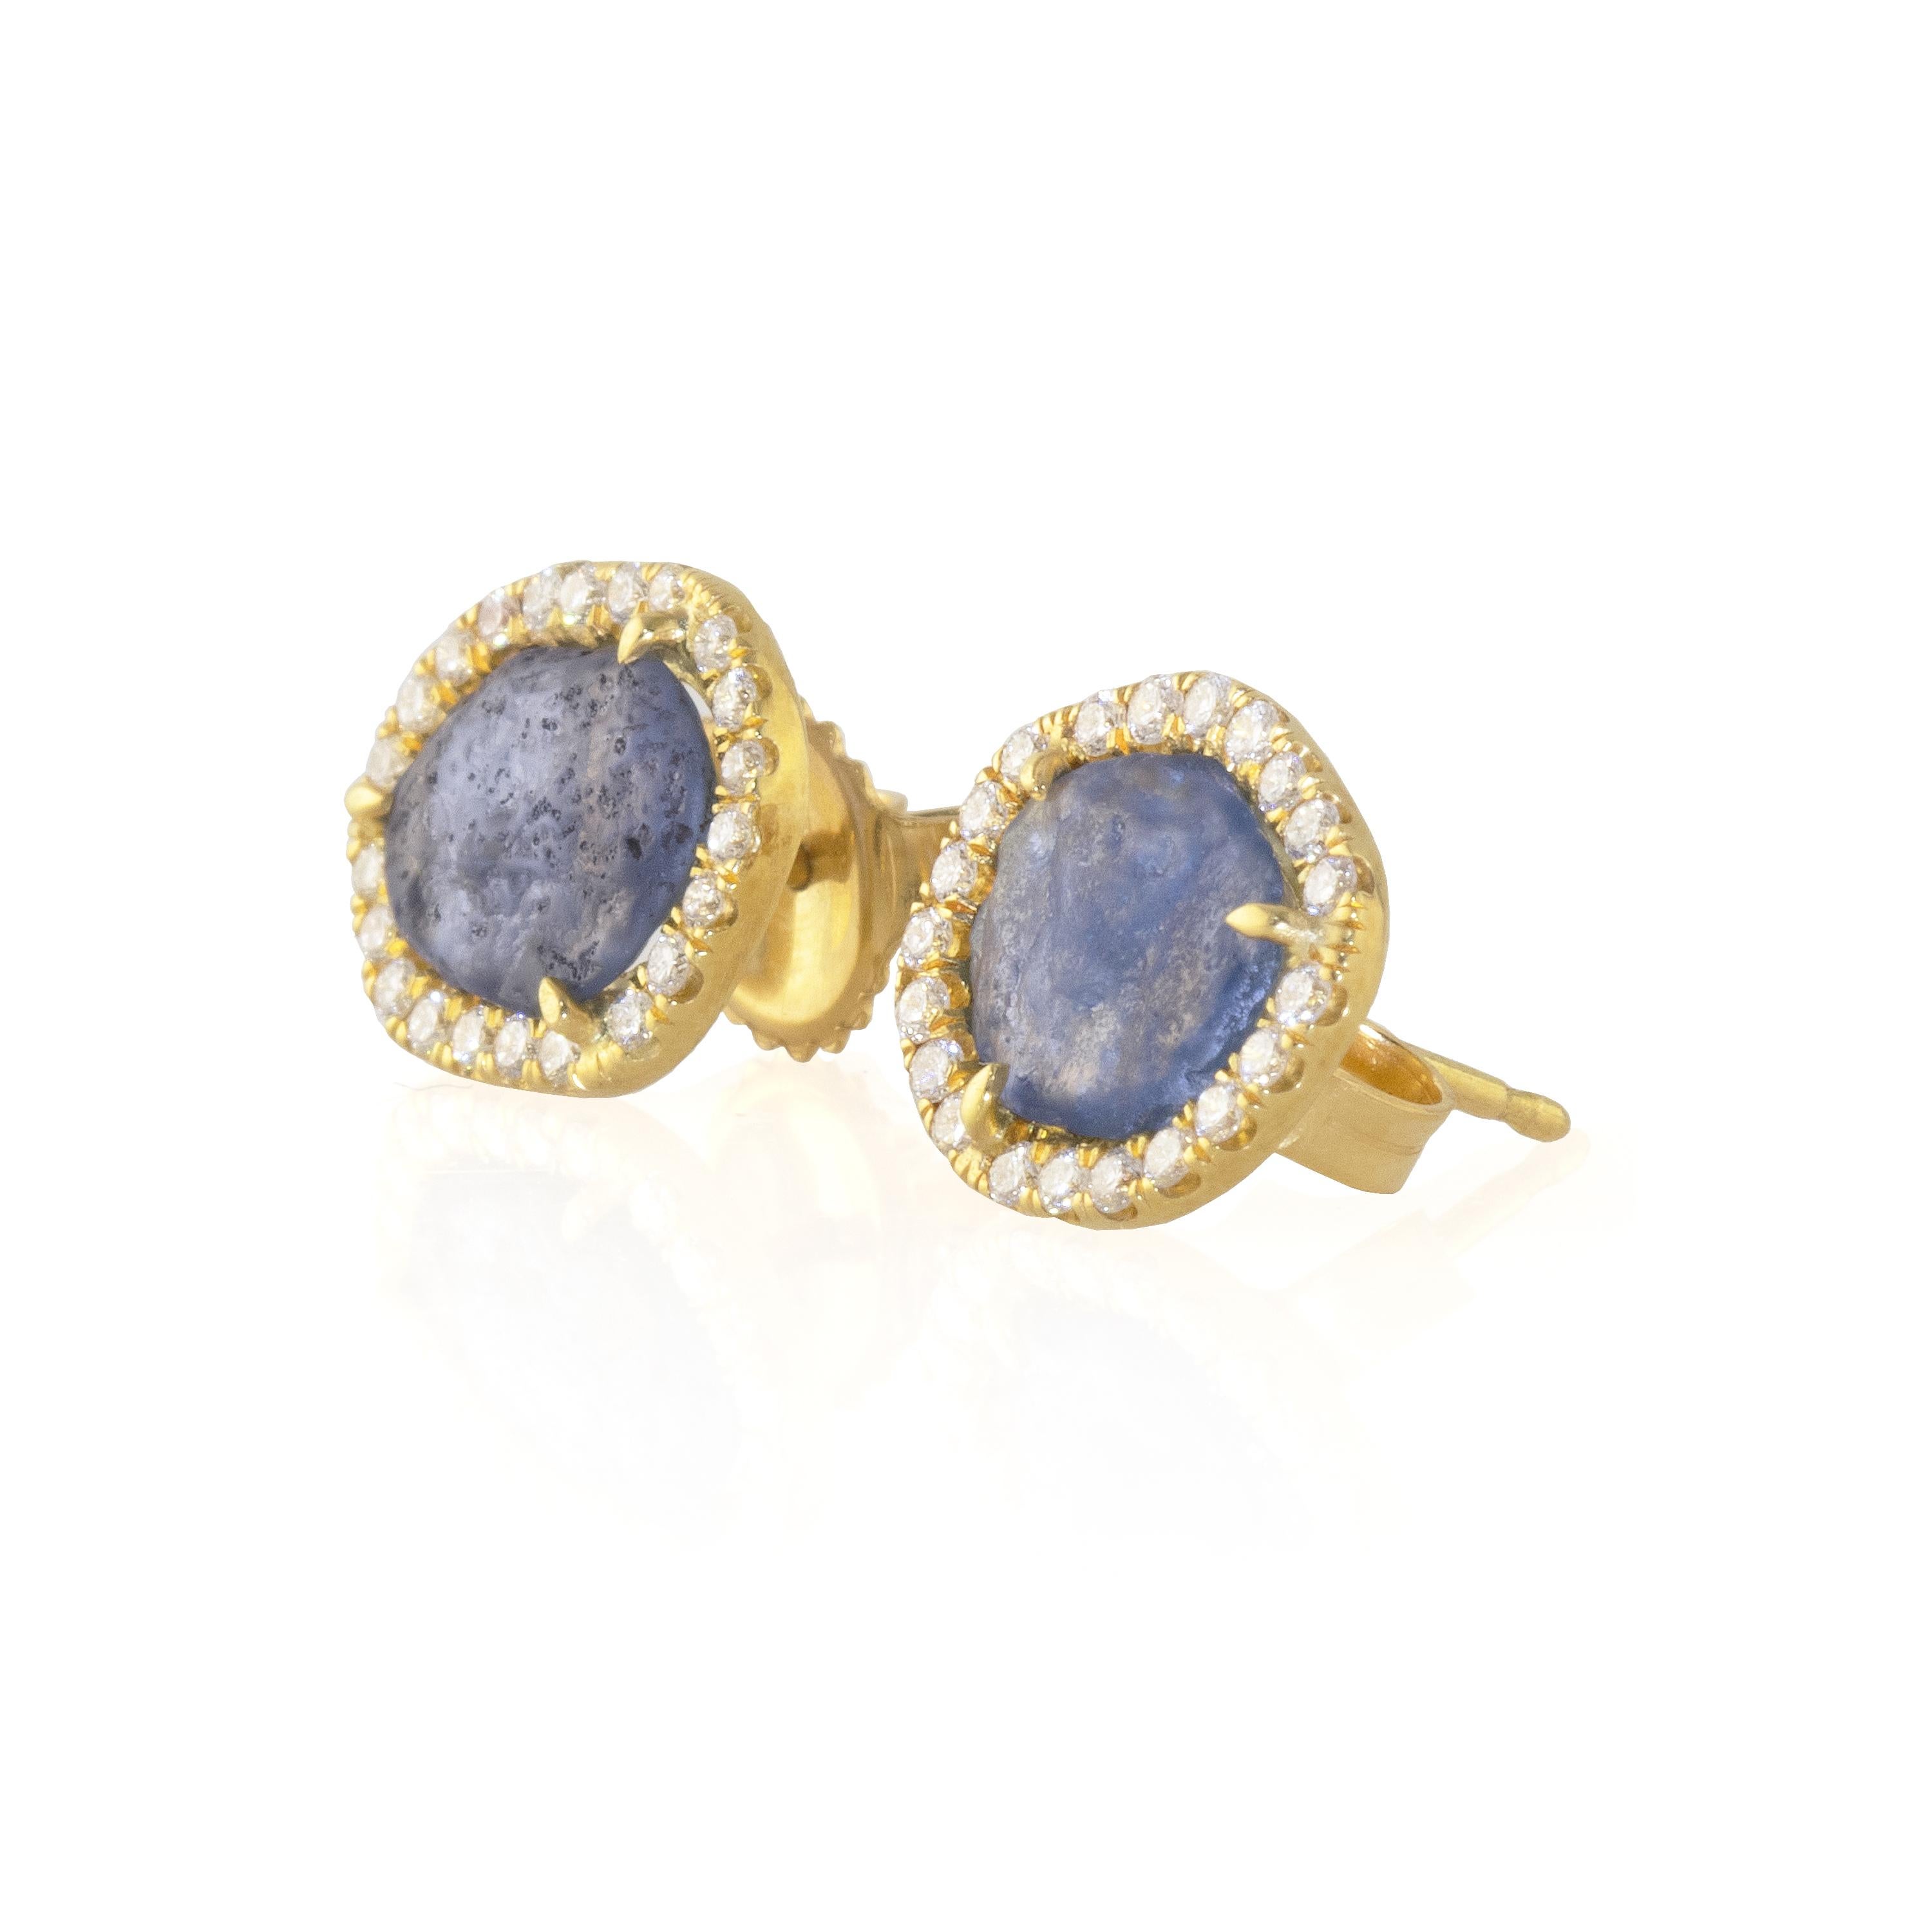 These beautiful studs feature a flat Montana Yogo Sapphires rough stone surrounded by VS diamonds (.38cts). Yogo Sapphires are considered to be among the finest sapphires in the world and are the most precious found in North America. These are